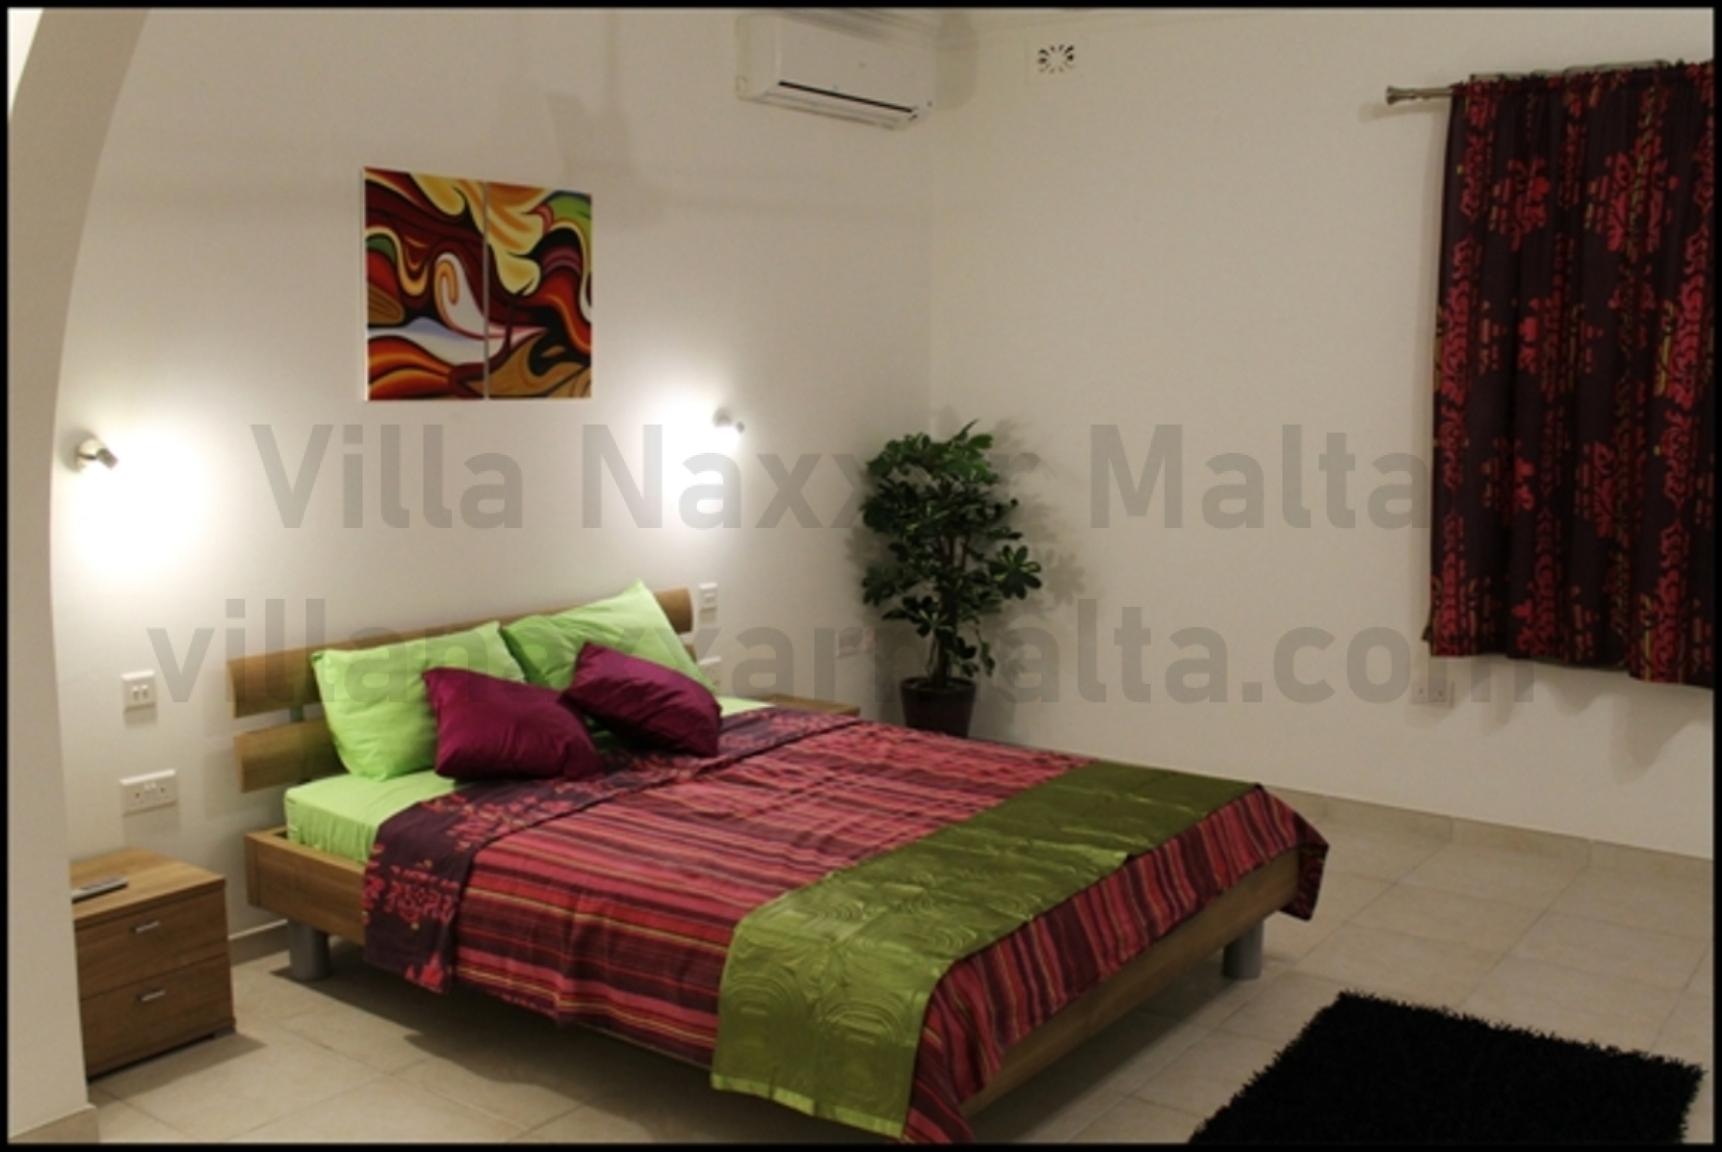 Villa Naxxar Malta – Main Bedroom (double Bed) with bathroom ensuite, large wardrobes, AC, WIFI and more ... space for additional beds